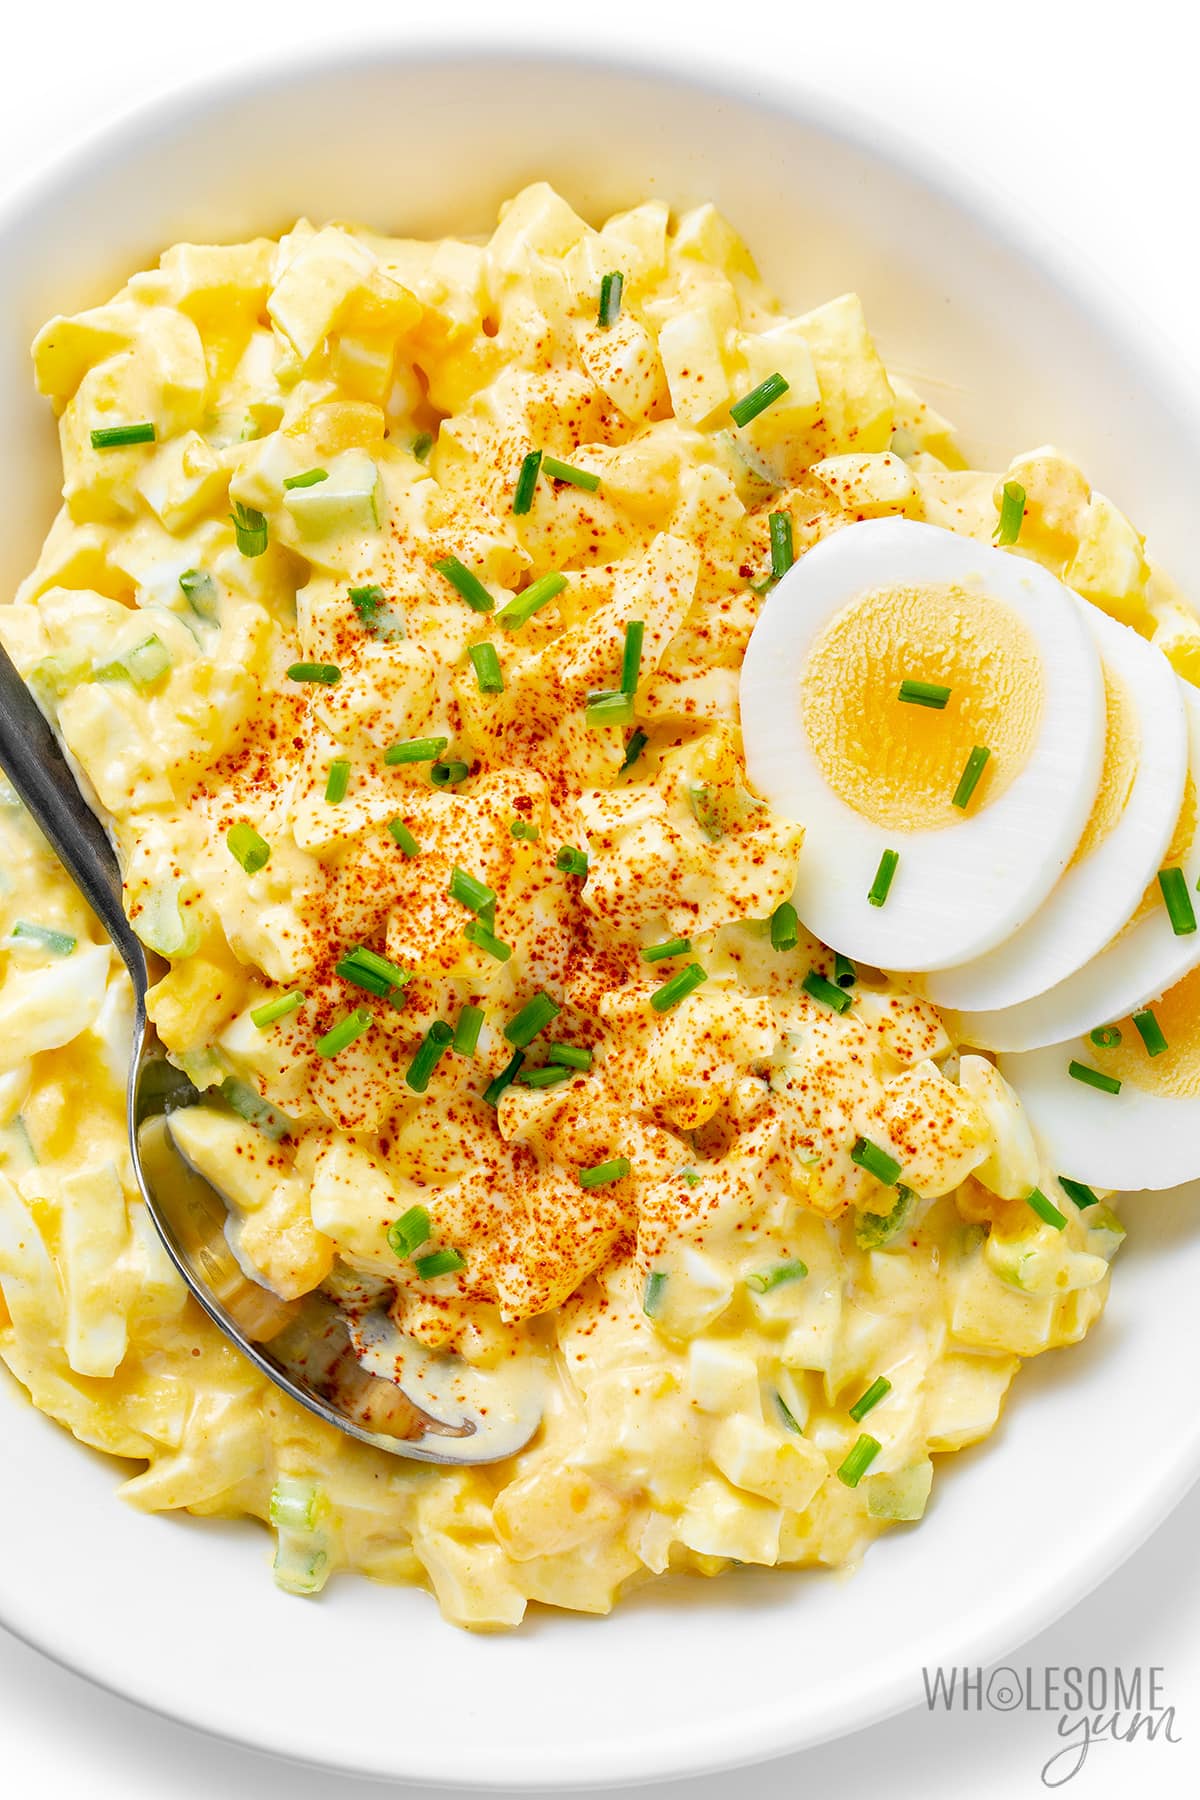 Easy egg salad in a bowl with a spoon.